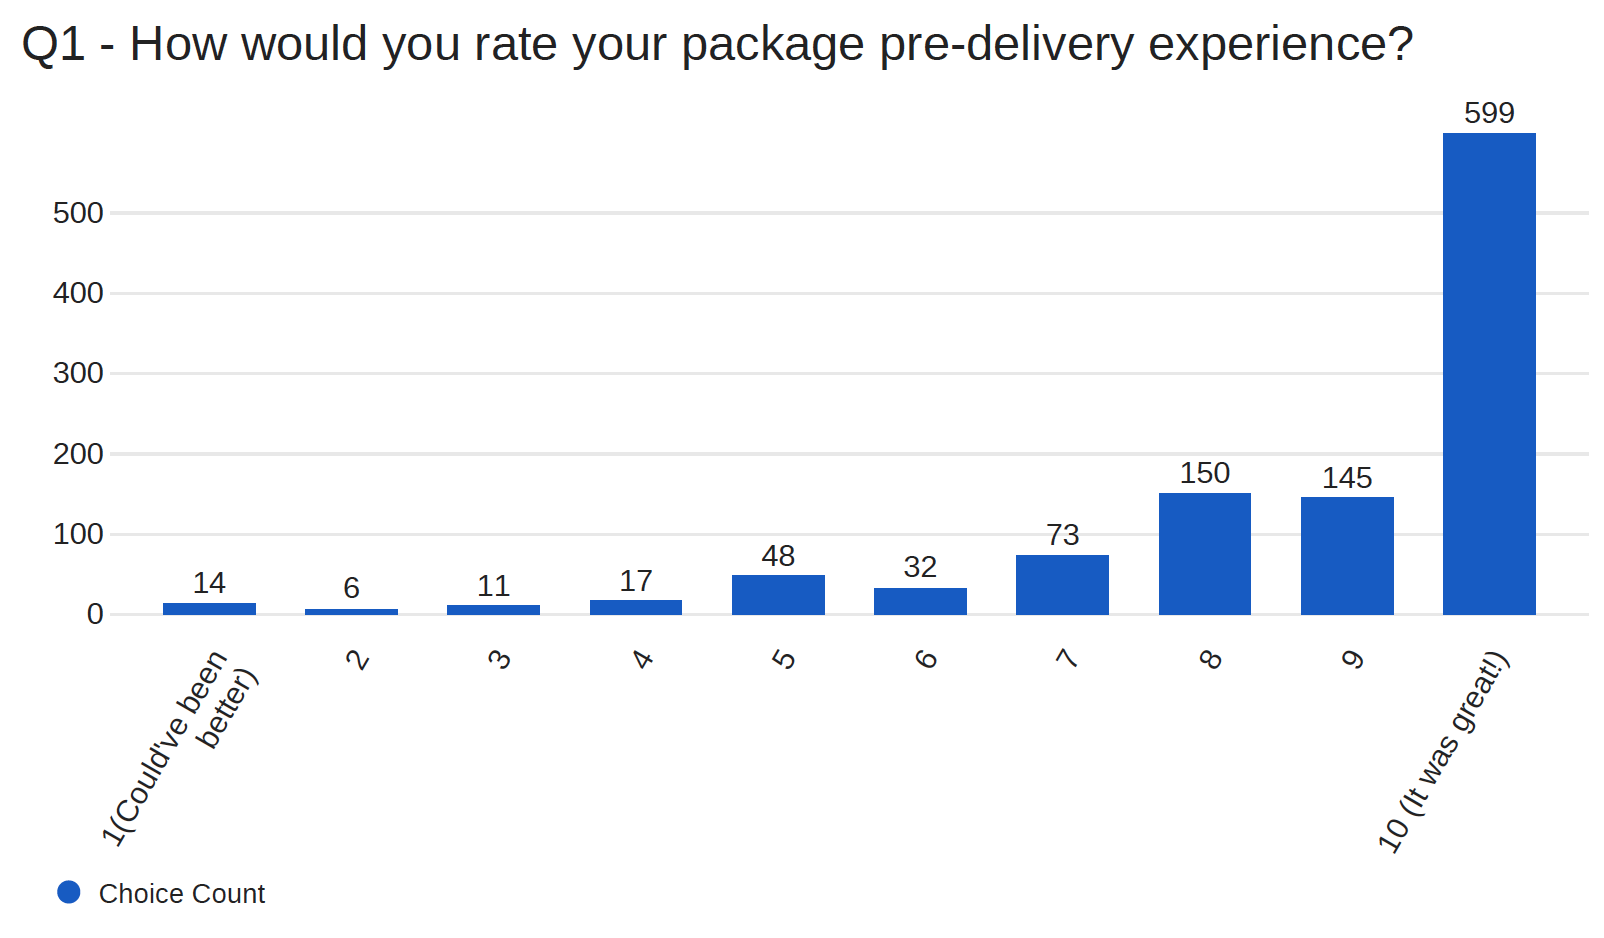 How would you rate your package pre-delivery experience?